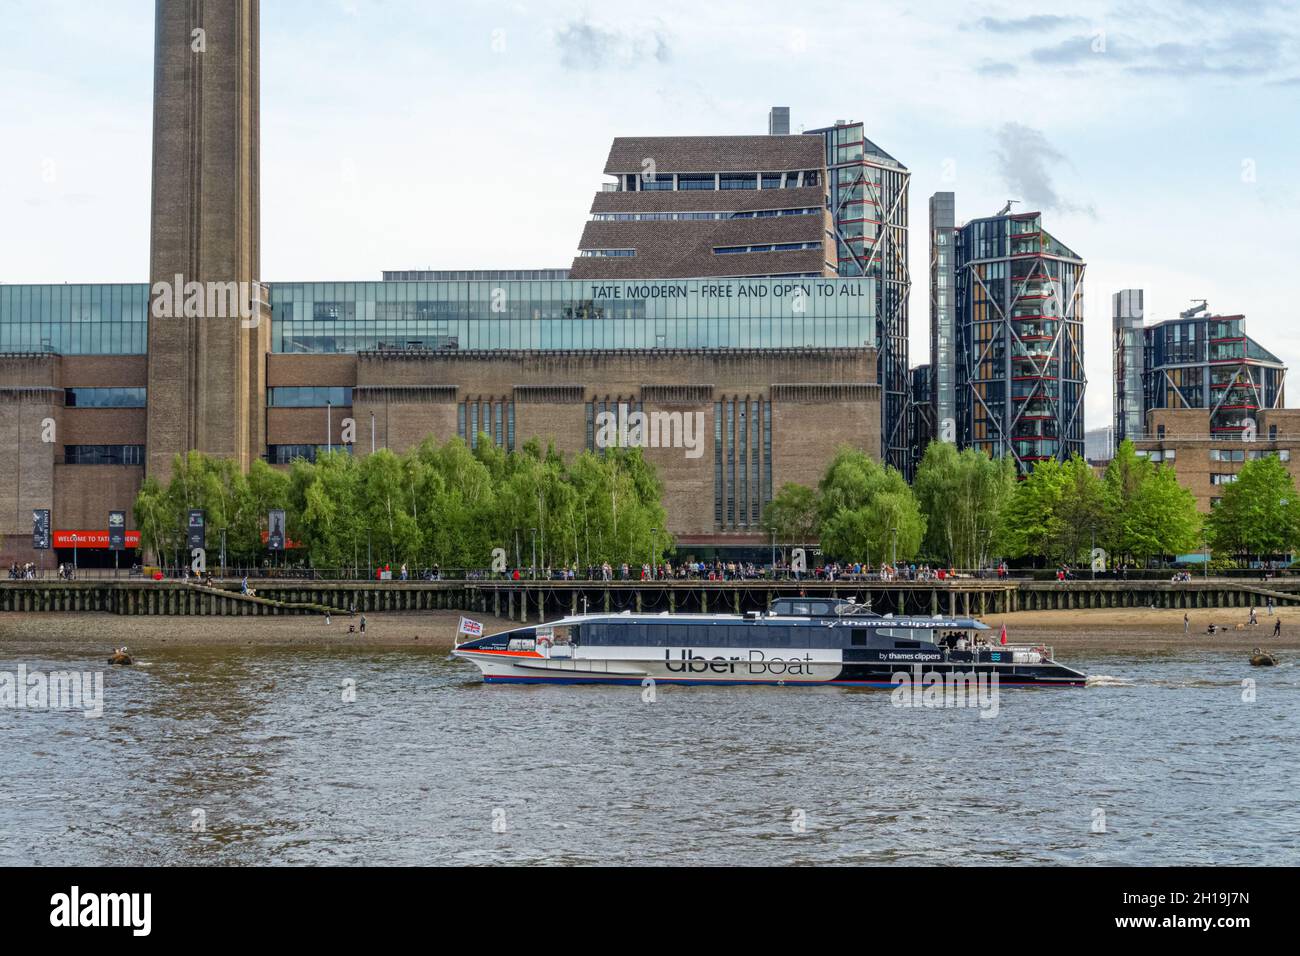 Thames clipper, Uber Boat on the River Thames in front of Tate Modern gallery, London England United Kingdom UK Stock Photo